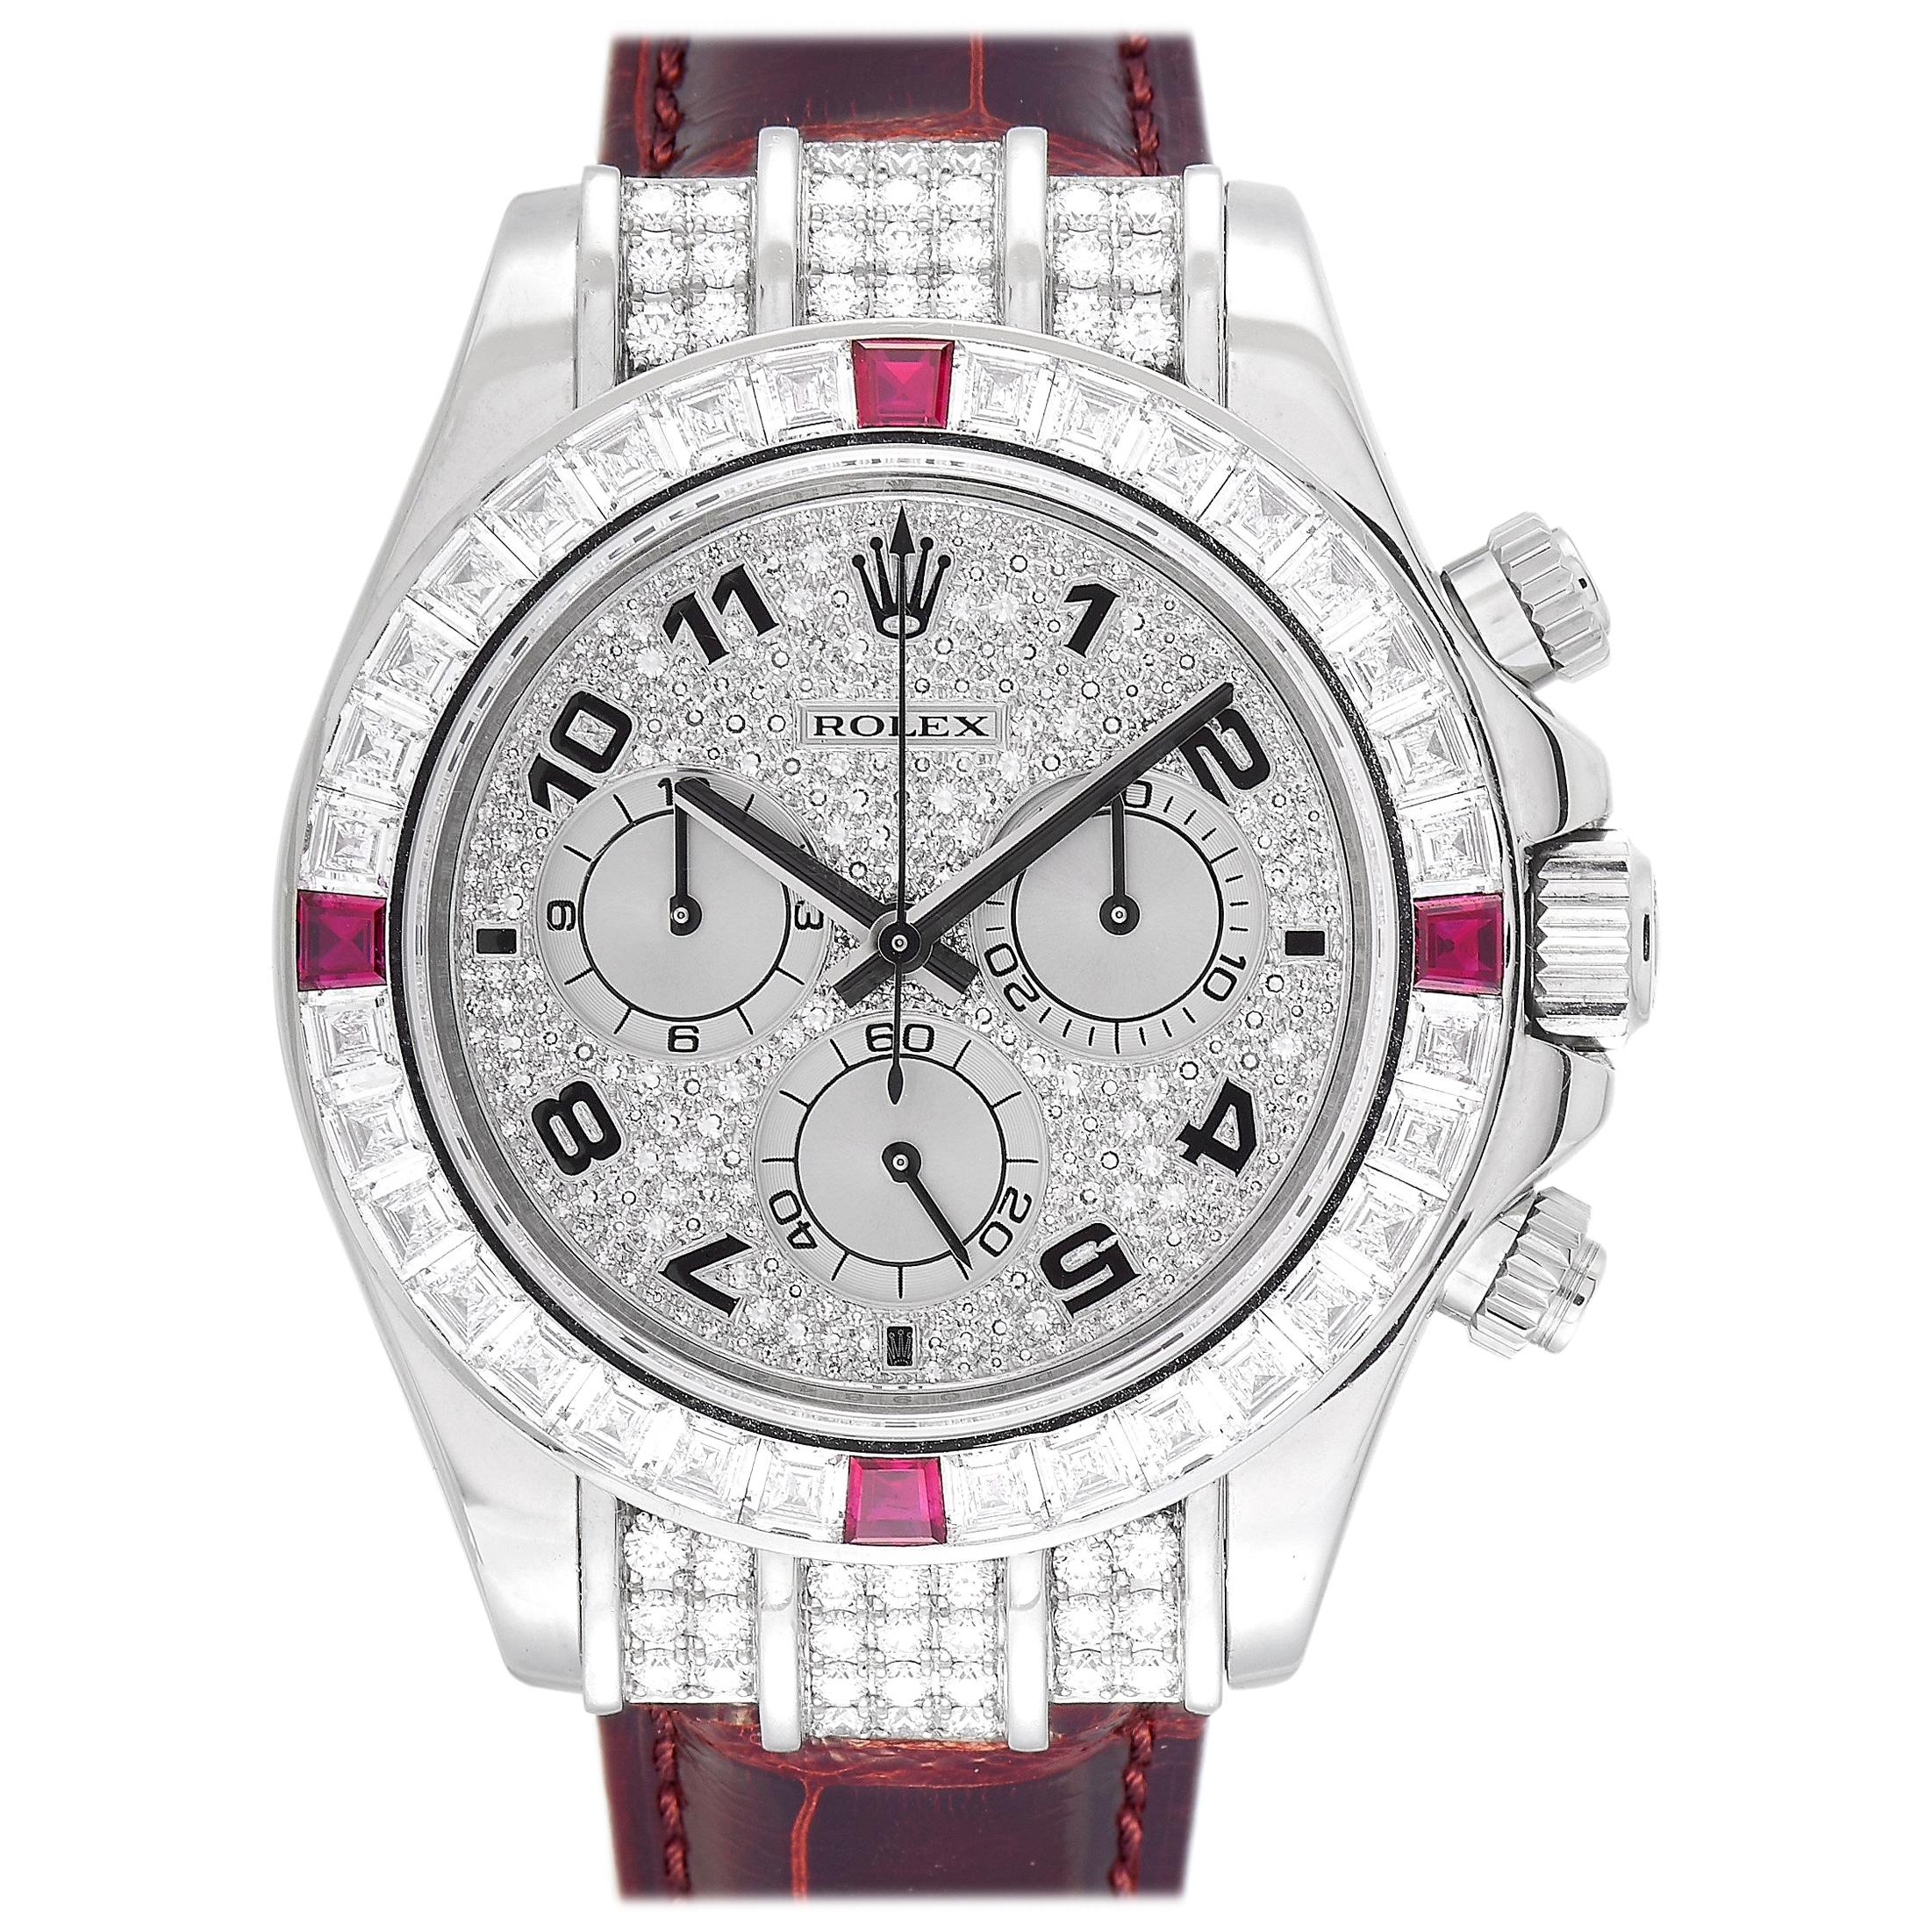 Rolex Cosmograph Daytona Diamond and Ruby Watch 116599 For Sale at 1stDibs